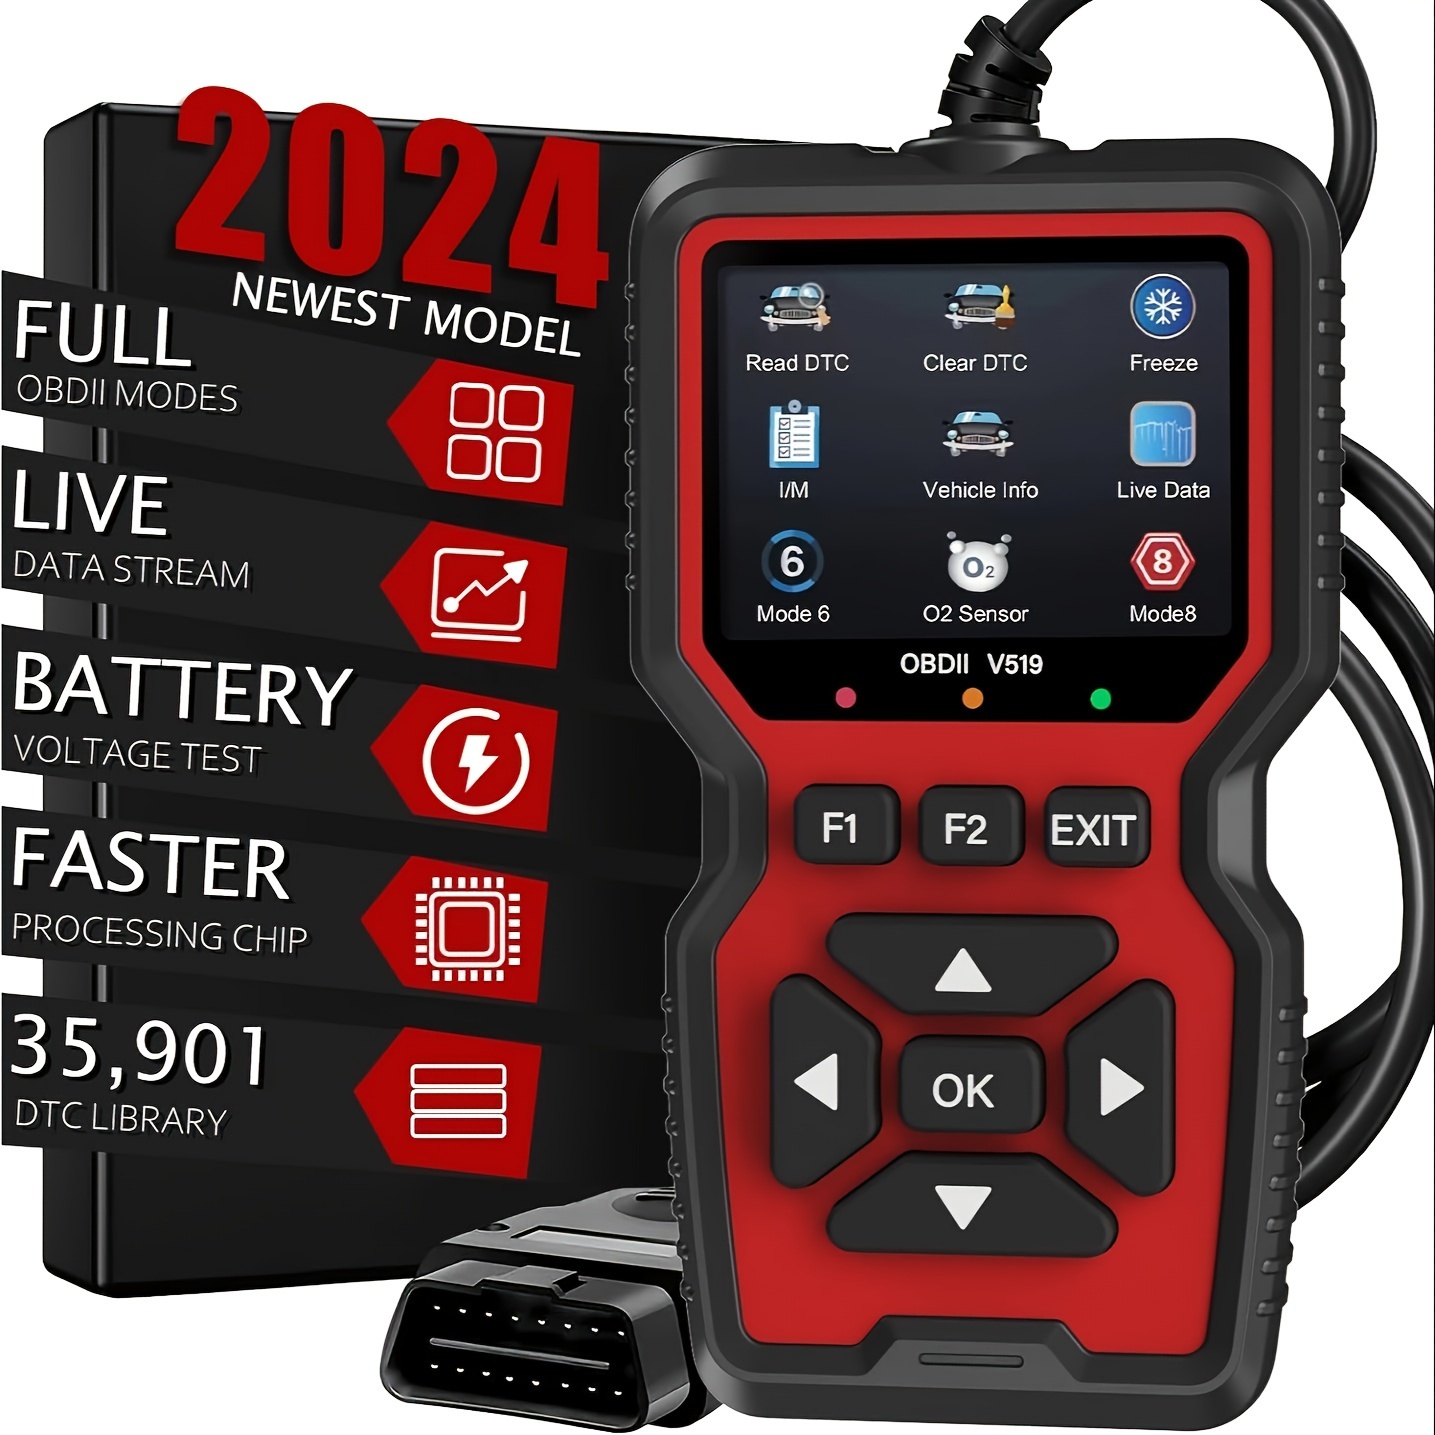 

V519 Professional Obd2 Scanner, Car Diagnostic Code Reader With Full System Scan, Eobd For Engine & Battery Test, Usb Powered, Up To 36v Operation, Live Data Stream, I/m Readiness, Dtc Lookup